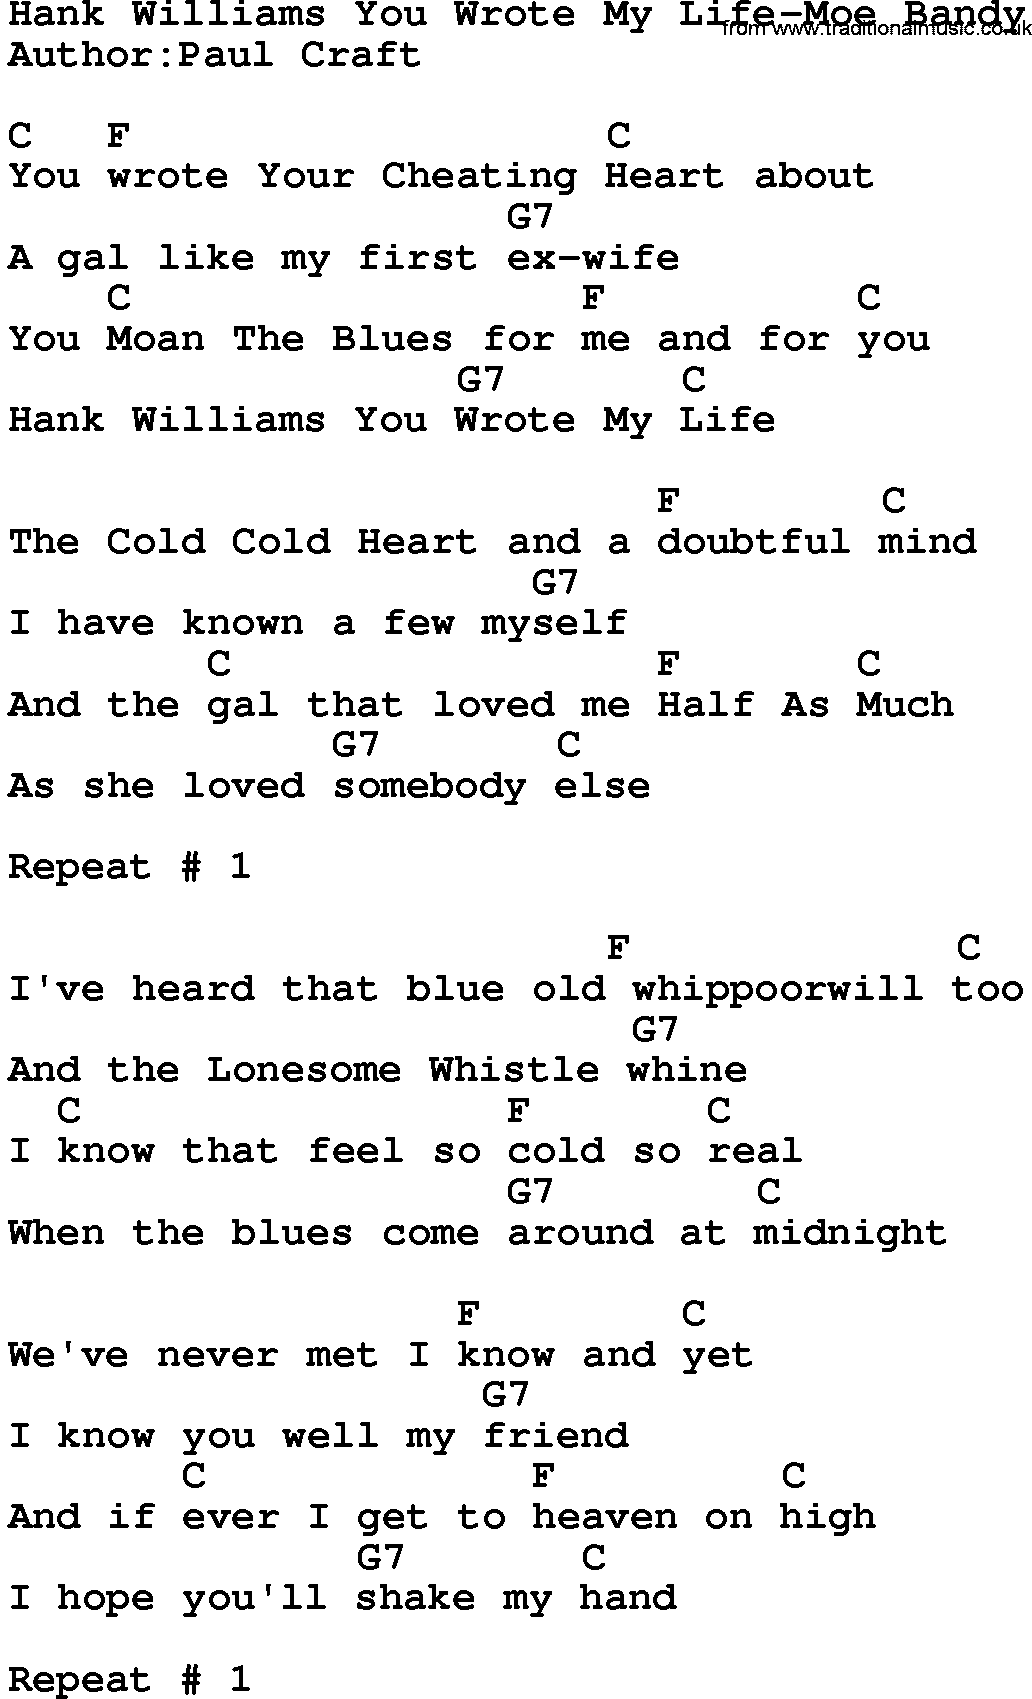 Country music song: Hank Williams You Wrote My Life-Moe Bandy lyrics and chords